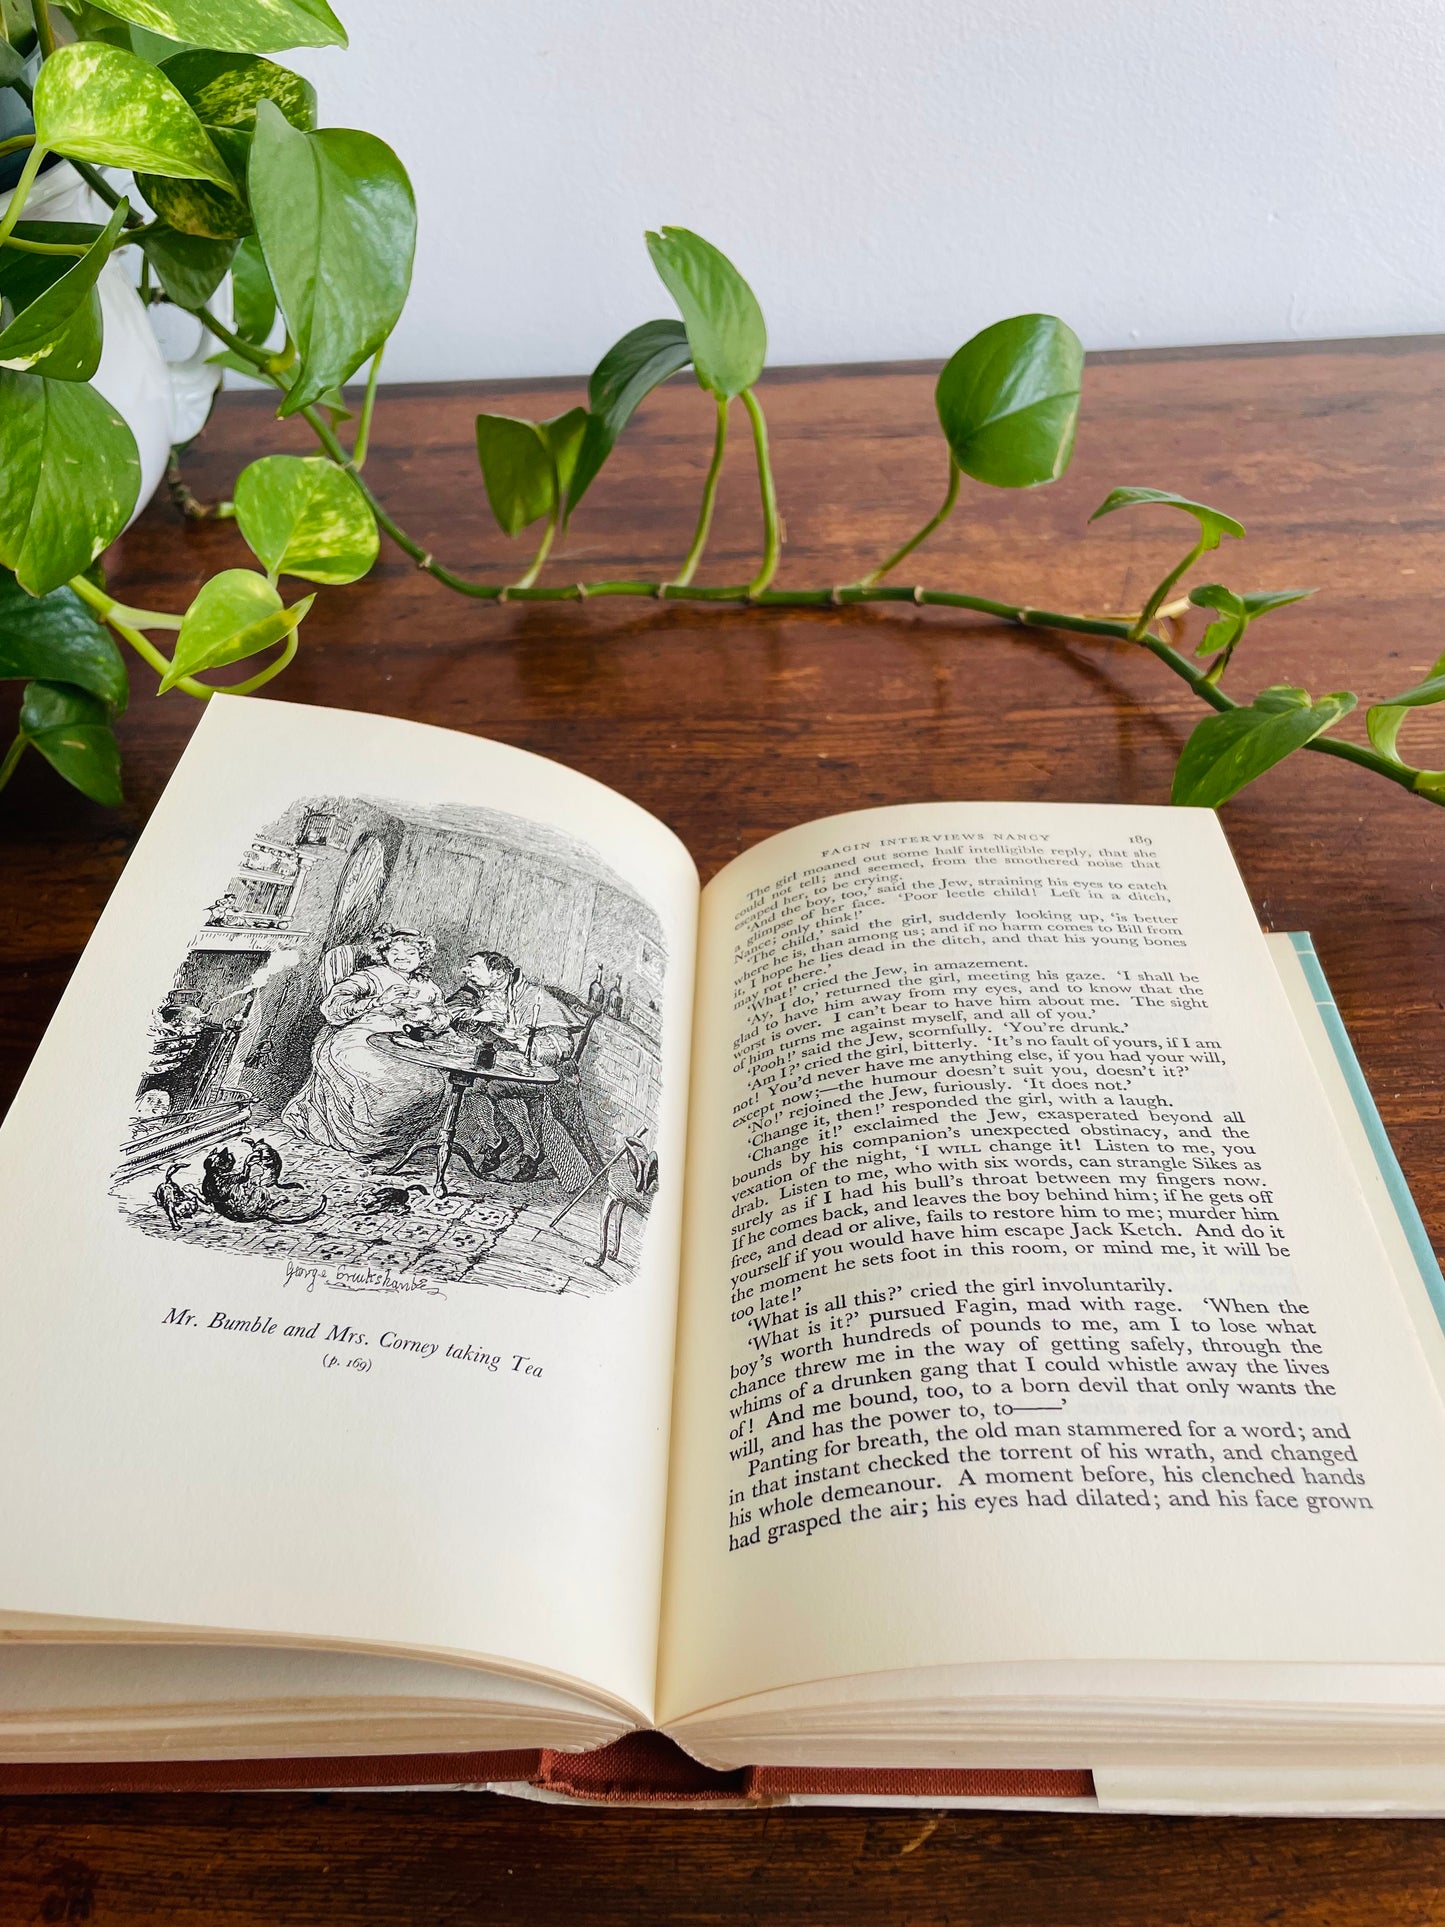 Oliver Twist by Charles Dickens Clothbound Hardcover Book with the Original Illustrations - The Oxford Illustrated Dickens (1959)